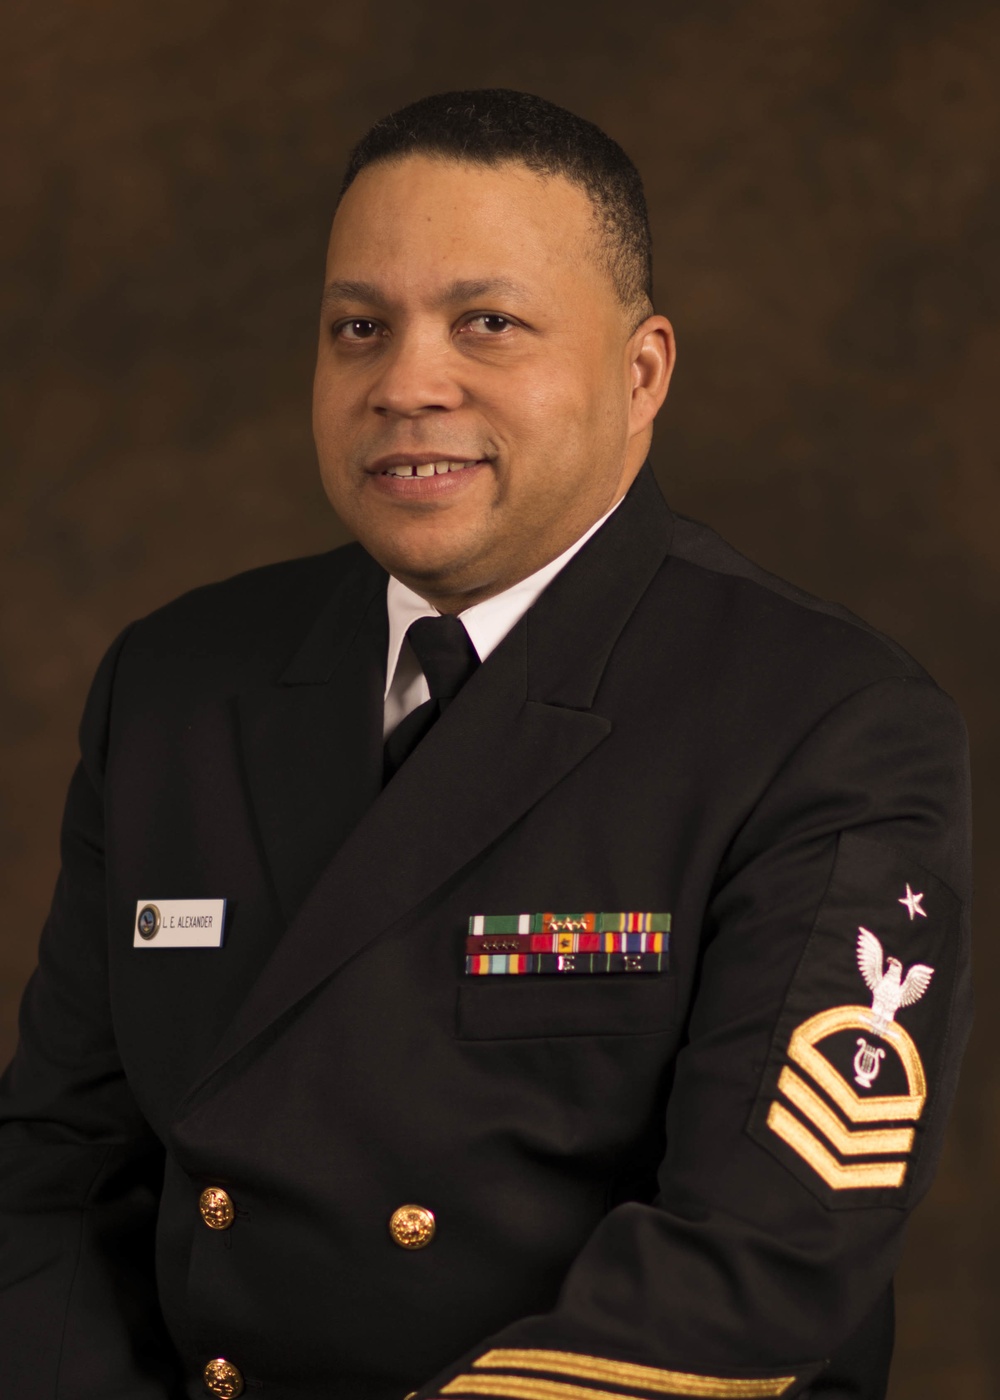 U.S. Navy Senior Chief Alexander supports the 58th Presidential Inauguration